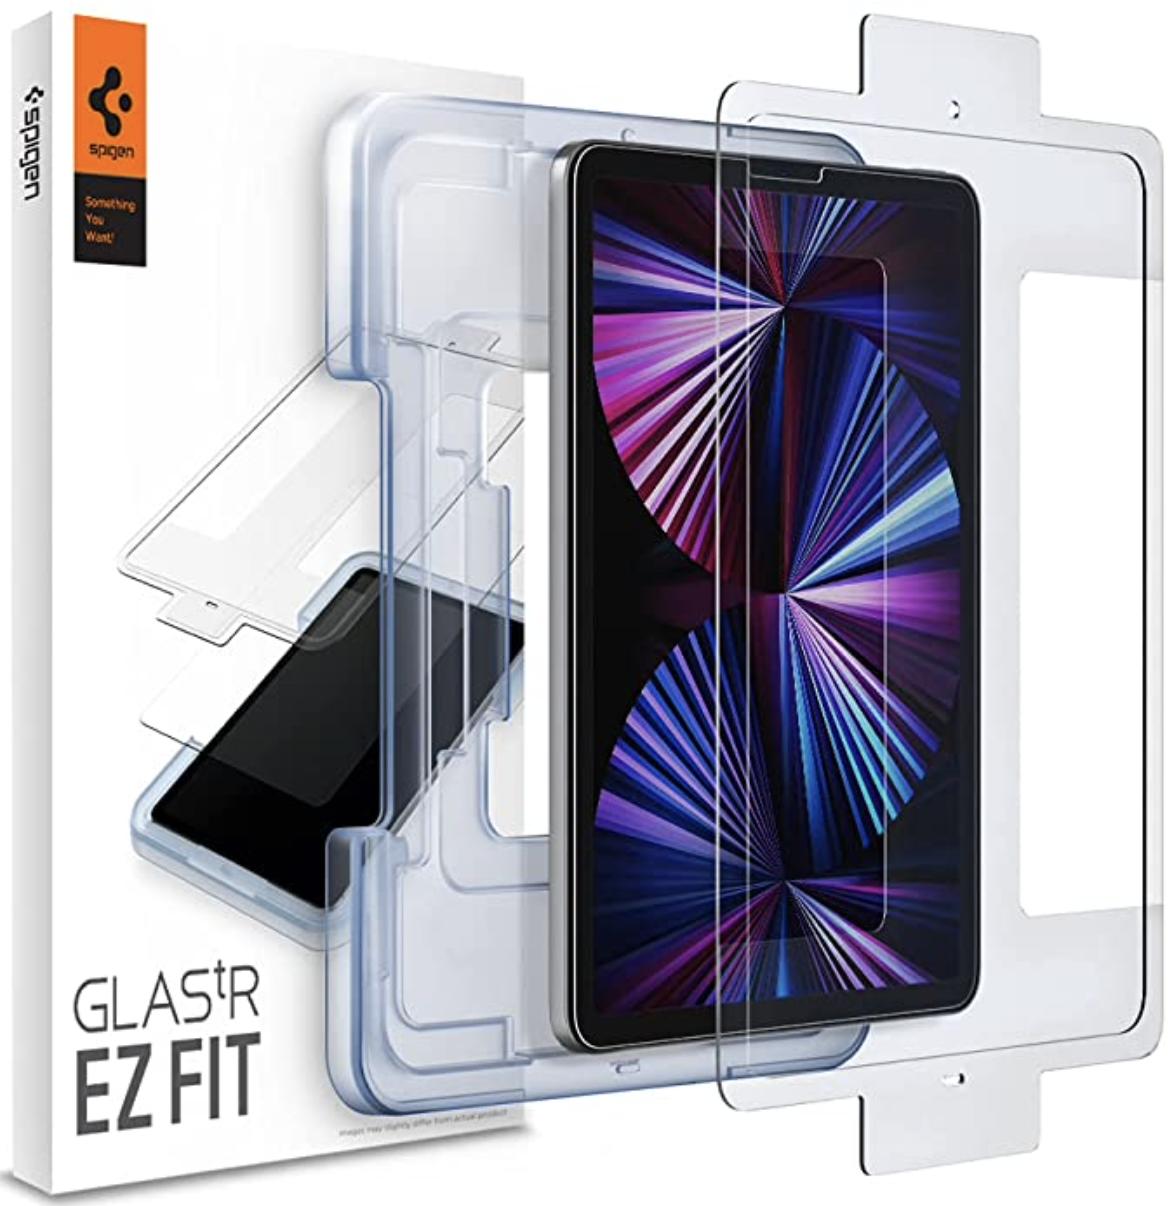 Spigen Tempered Glass Screen Protector Ipad Air 4 Ez Fit Render Cropped